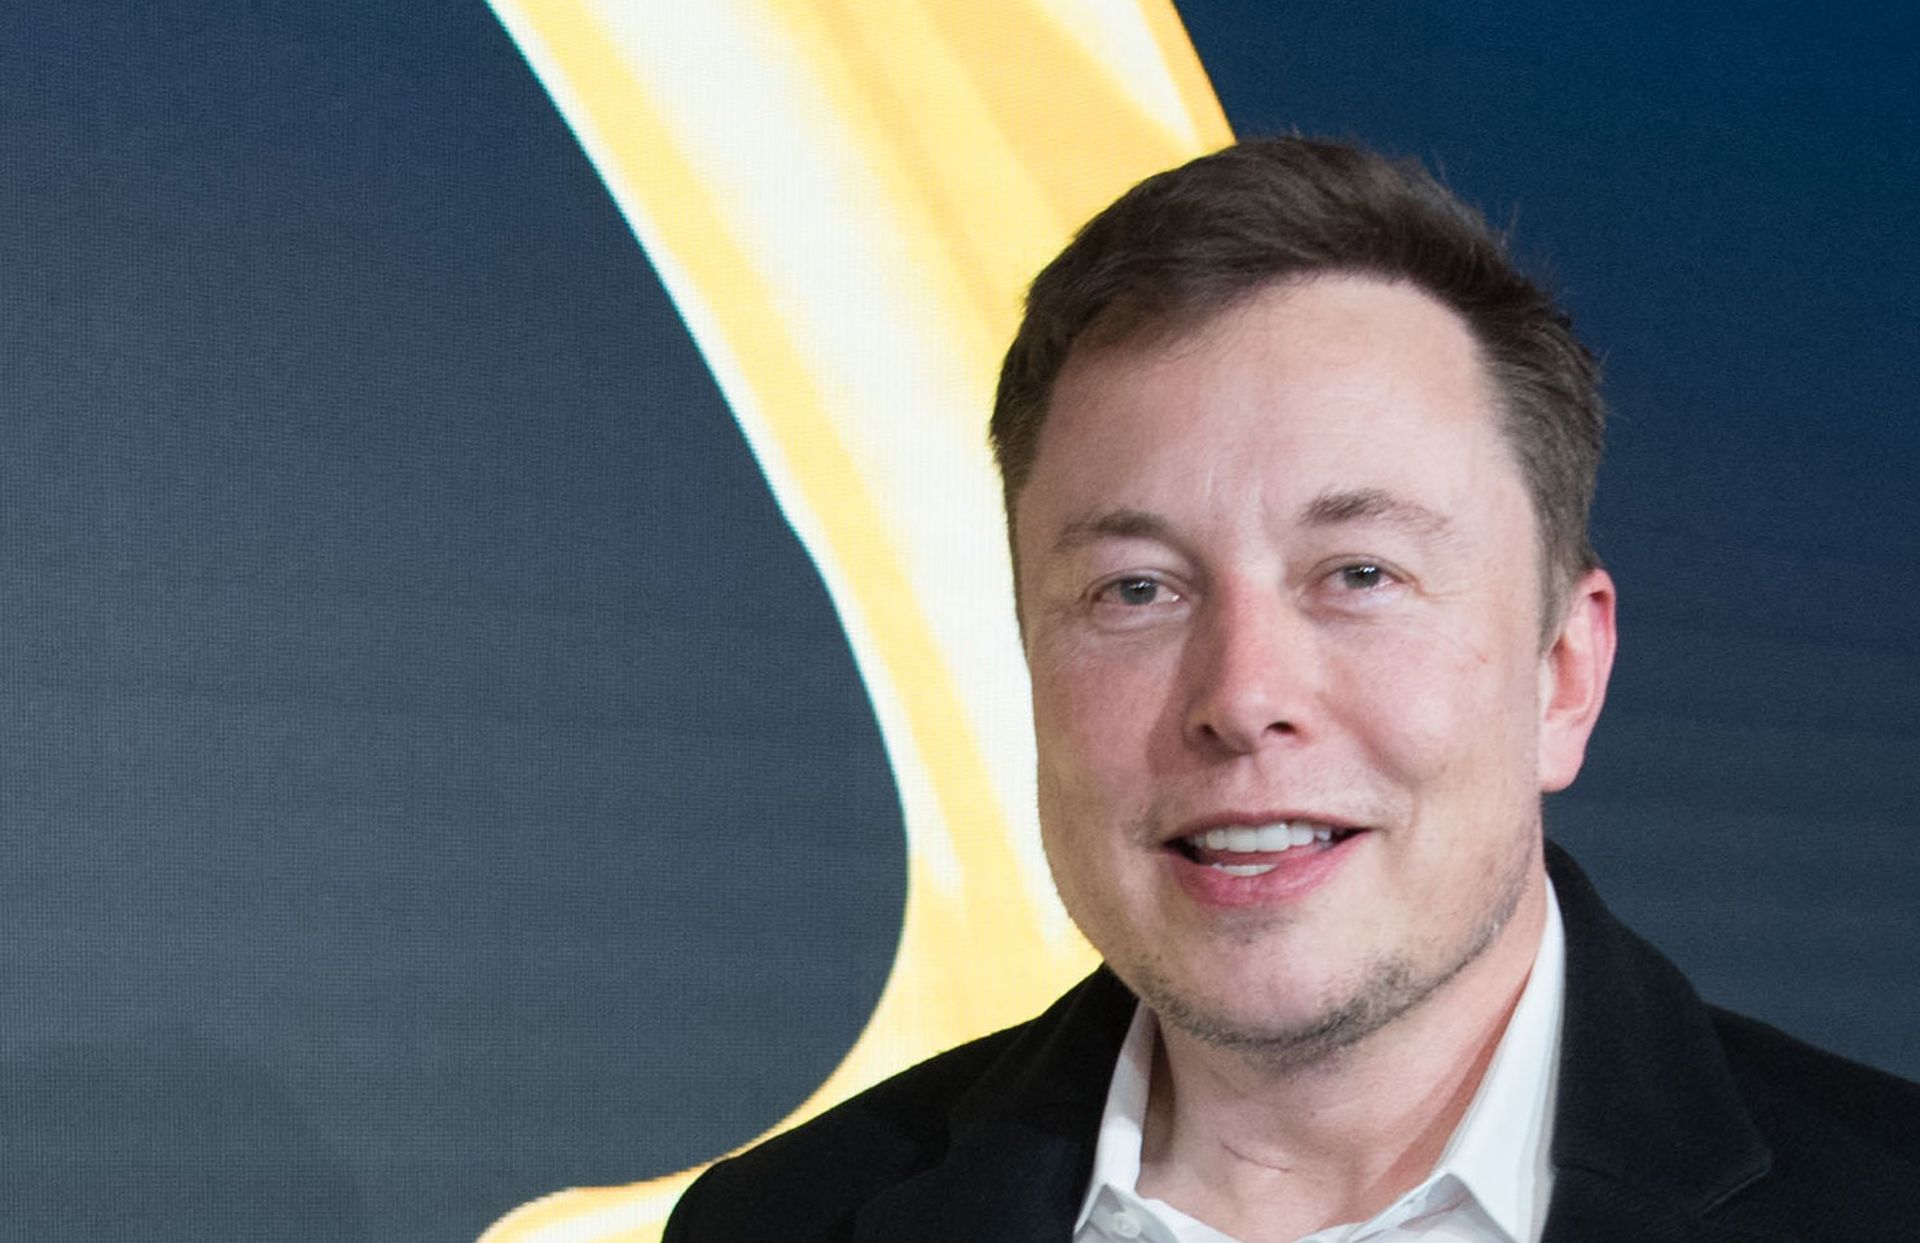 FILED - 12 November 2019, Berlin: Technology entrepreneur and CEO of SpaceX, Elon Musk arrives to attend the Golden Steering Wheel awards ceremony. Eccentric entrepreneur Elon Musk, the chief of electric carmaker Tesla, has been using his large platform on social media to call for reopening the US economy quickly, amid extended shutdowns due to the coronavirus pandemic. Photo: Jörg Carstensen/dpa